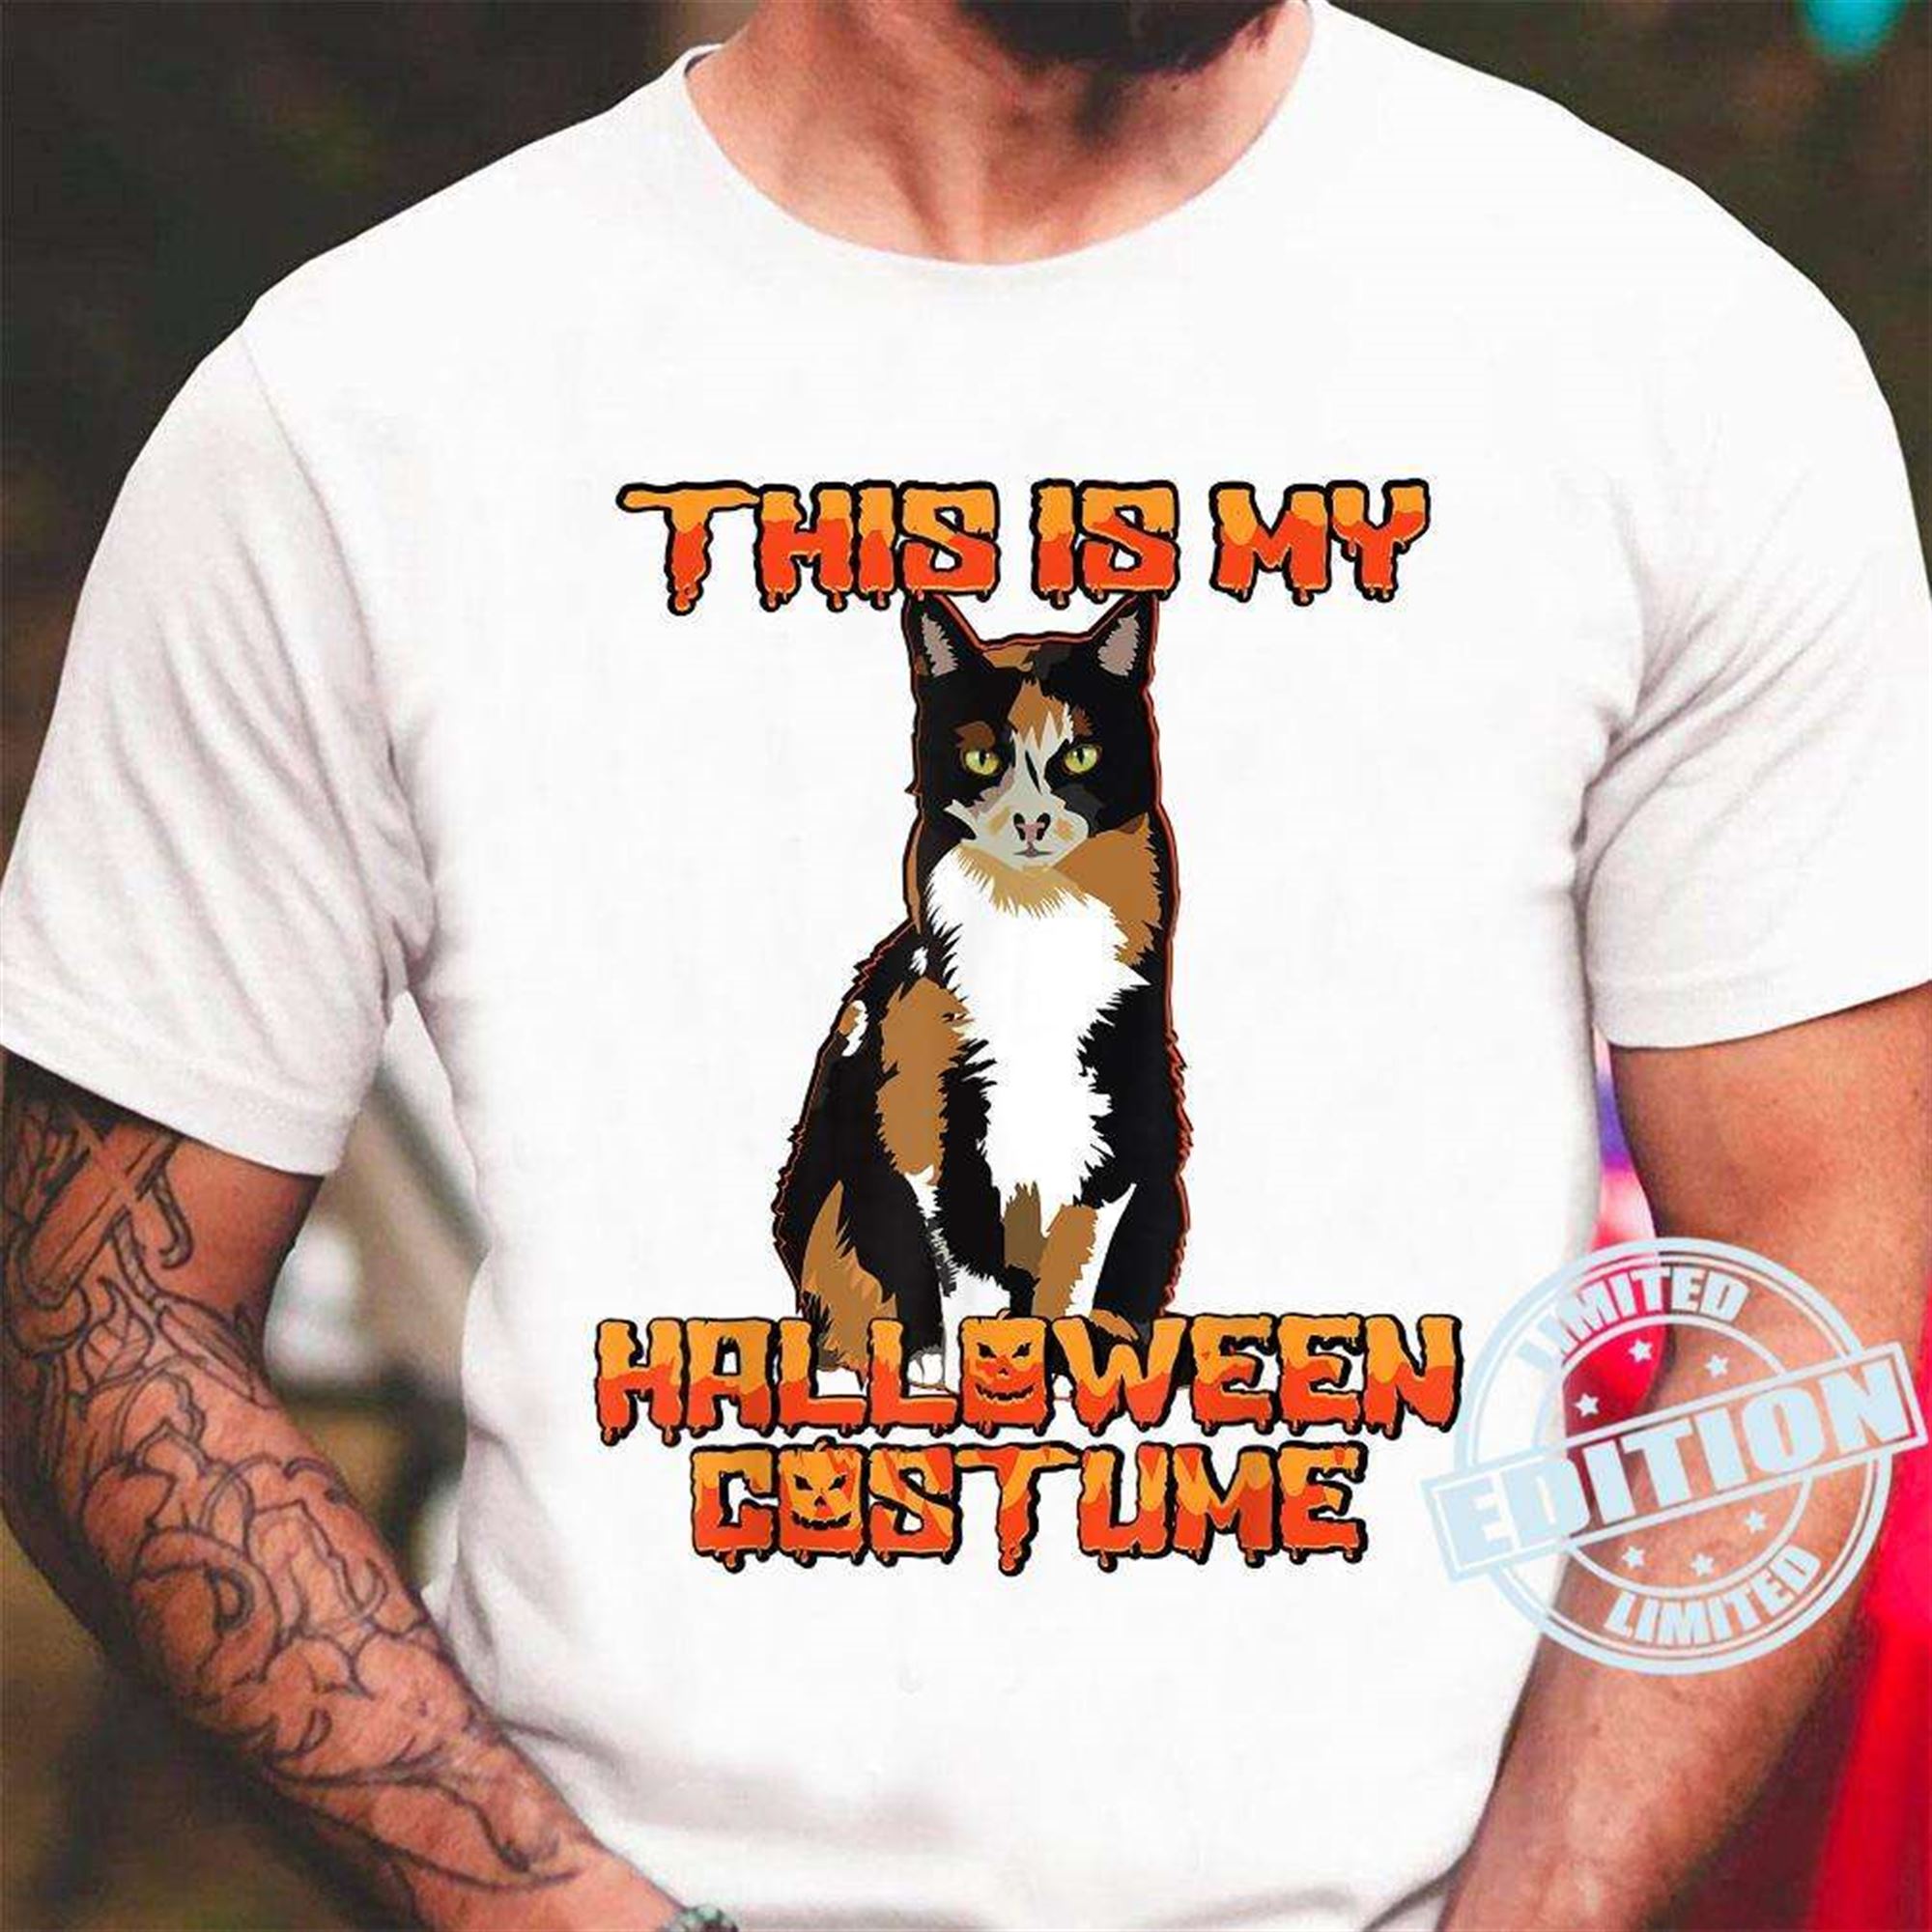 Lazy Halloween Costume Calico Cat T-shirt Full Size Up To 5xl